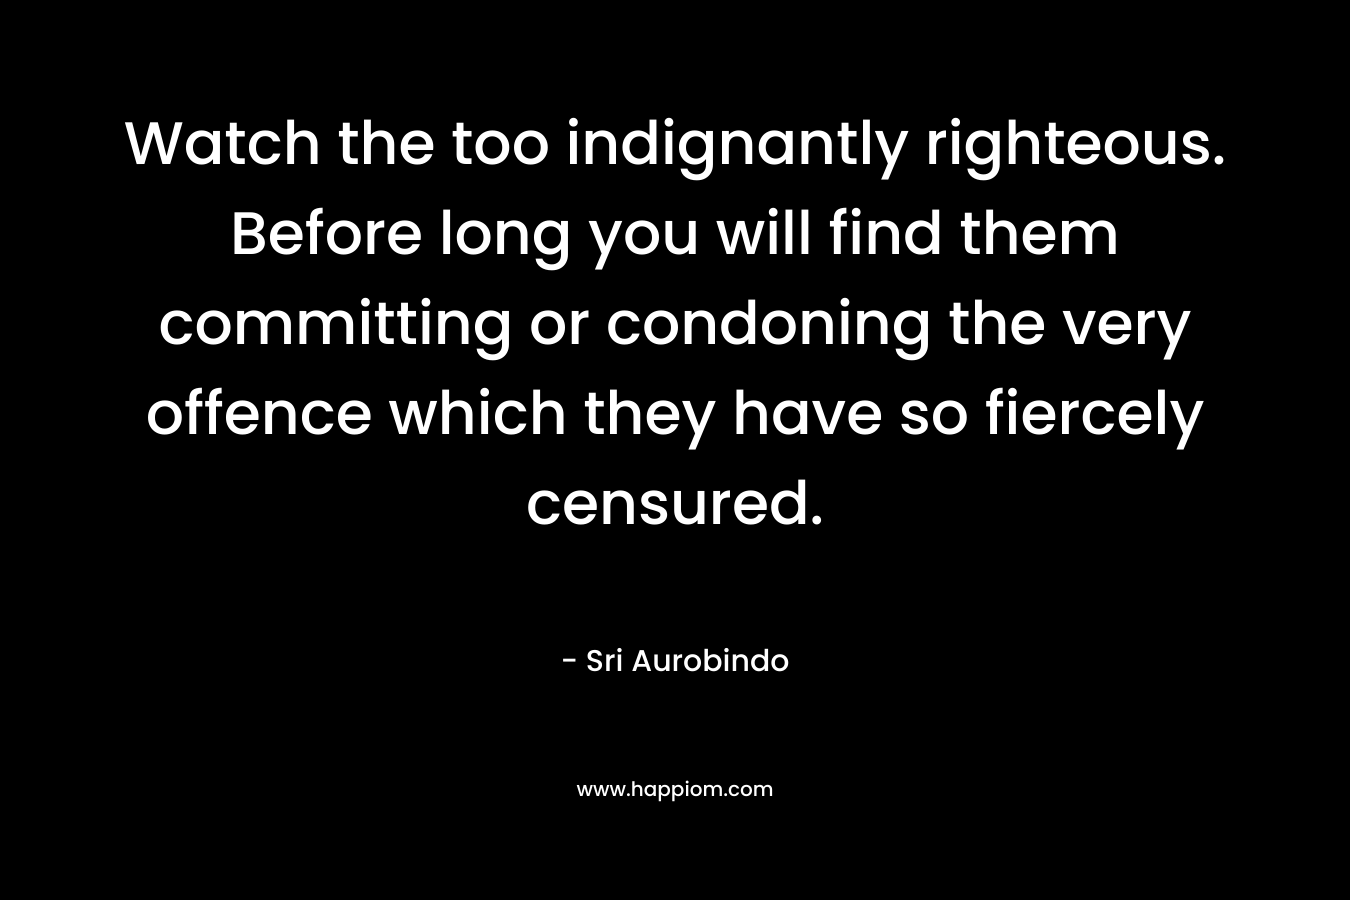 Watch the too indignantly righteous. Before long you will find them committing or condoning the very offence which they have so fiercely censured. – Sri Aurobindo